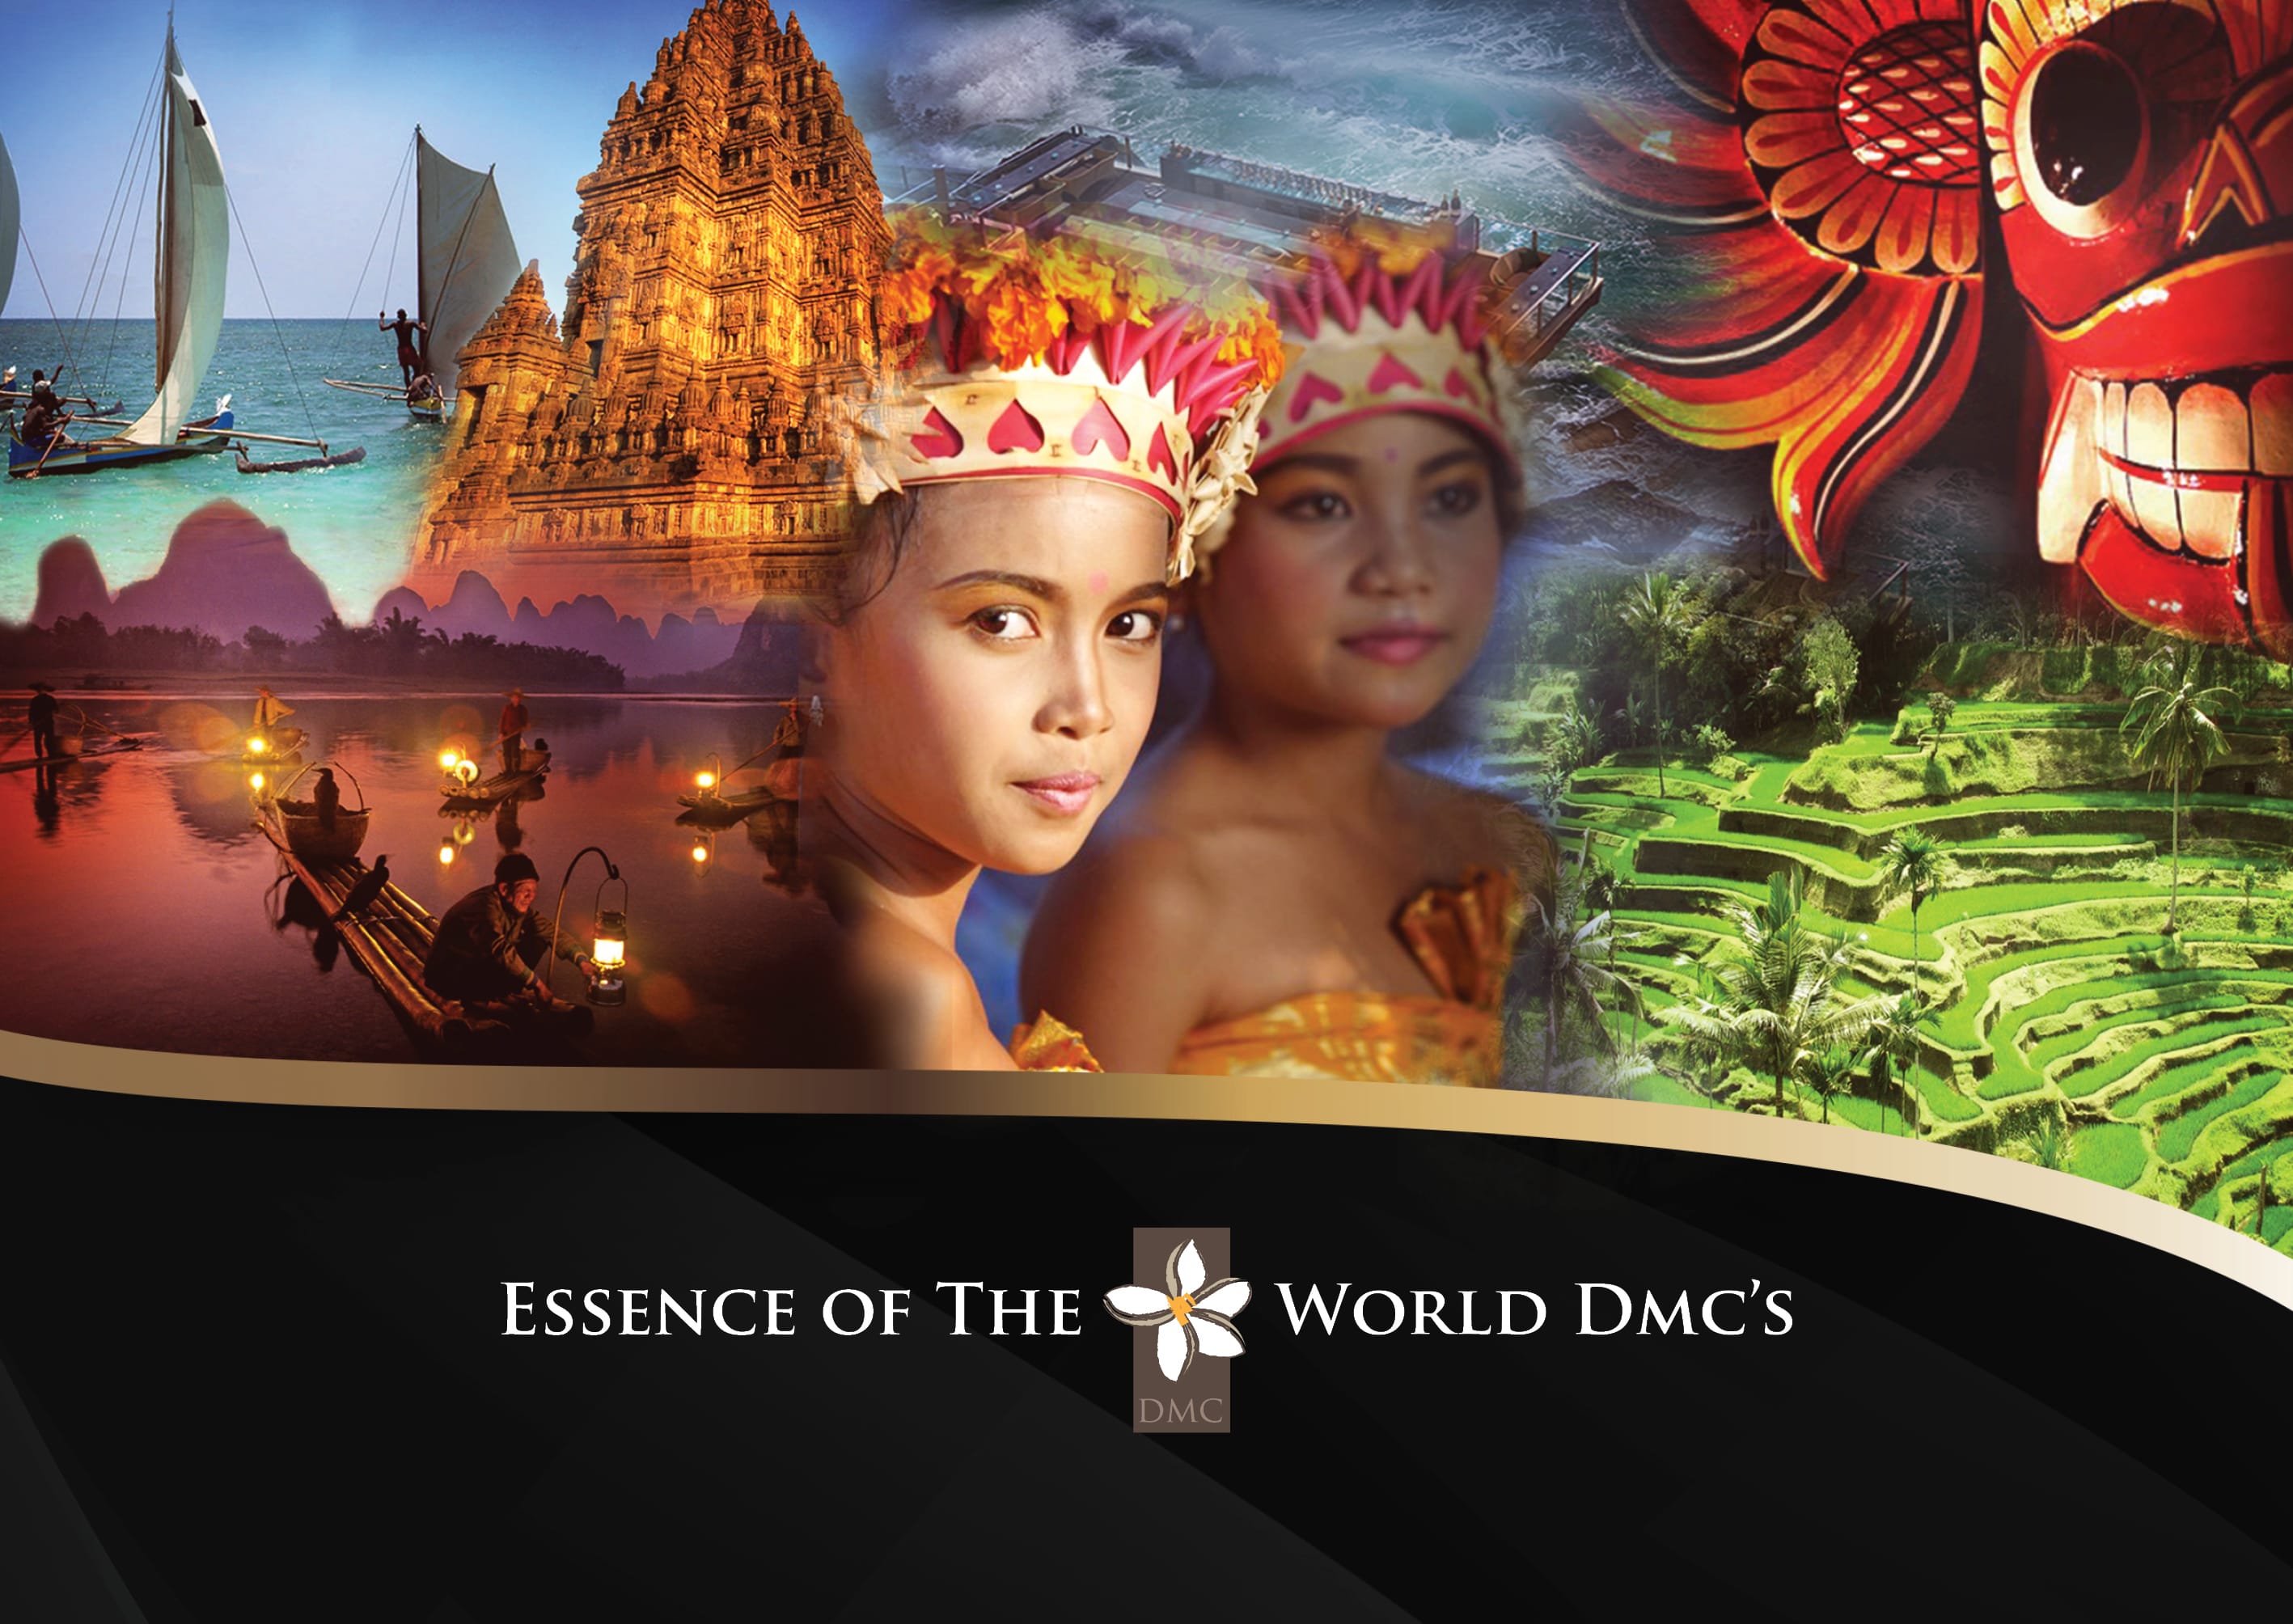 Essence of Bali / Essence of the world will be at Imex Germany  